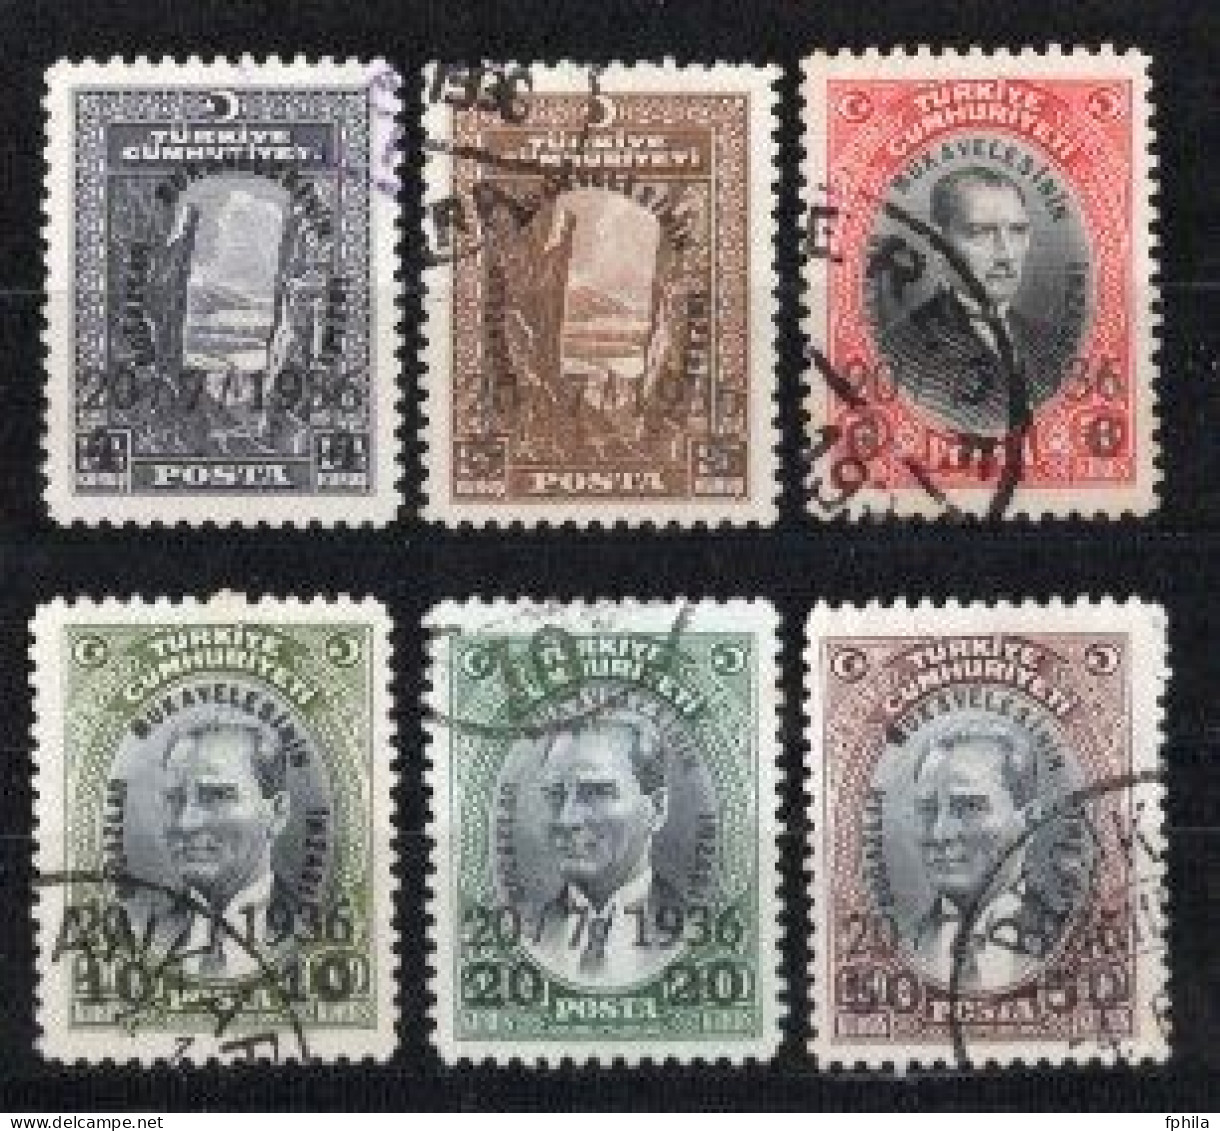 1936 TURKEY SURCHARGED COMMEMORATIVE STAMPS FOR THE SIGNATURE OF THE STRAITS SETTLEMENT USED - Gebruikt